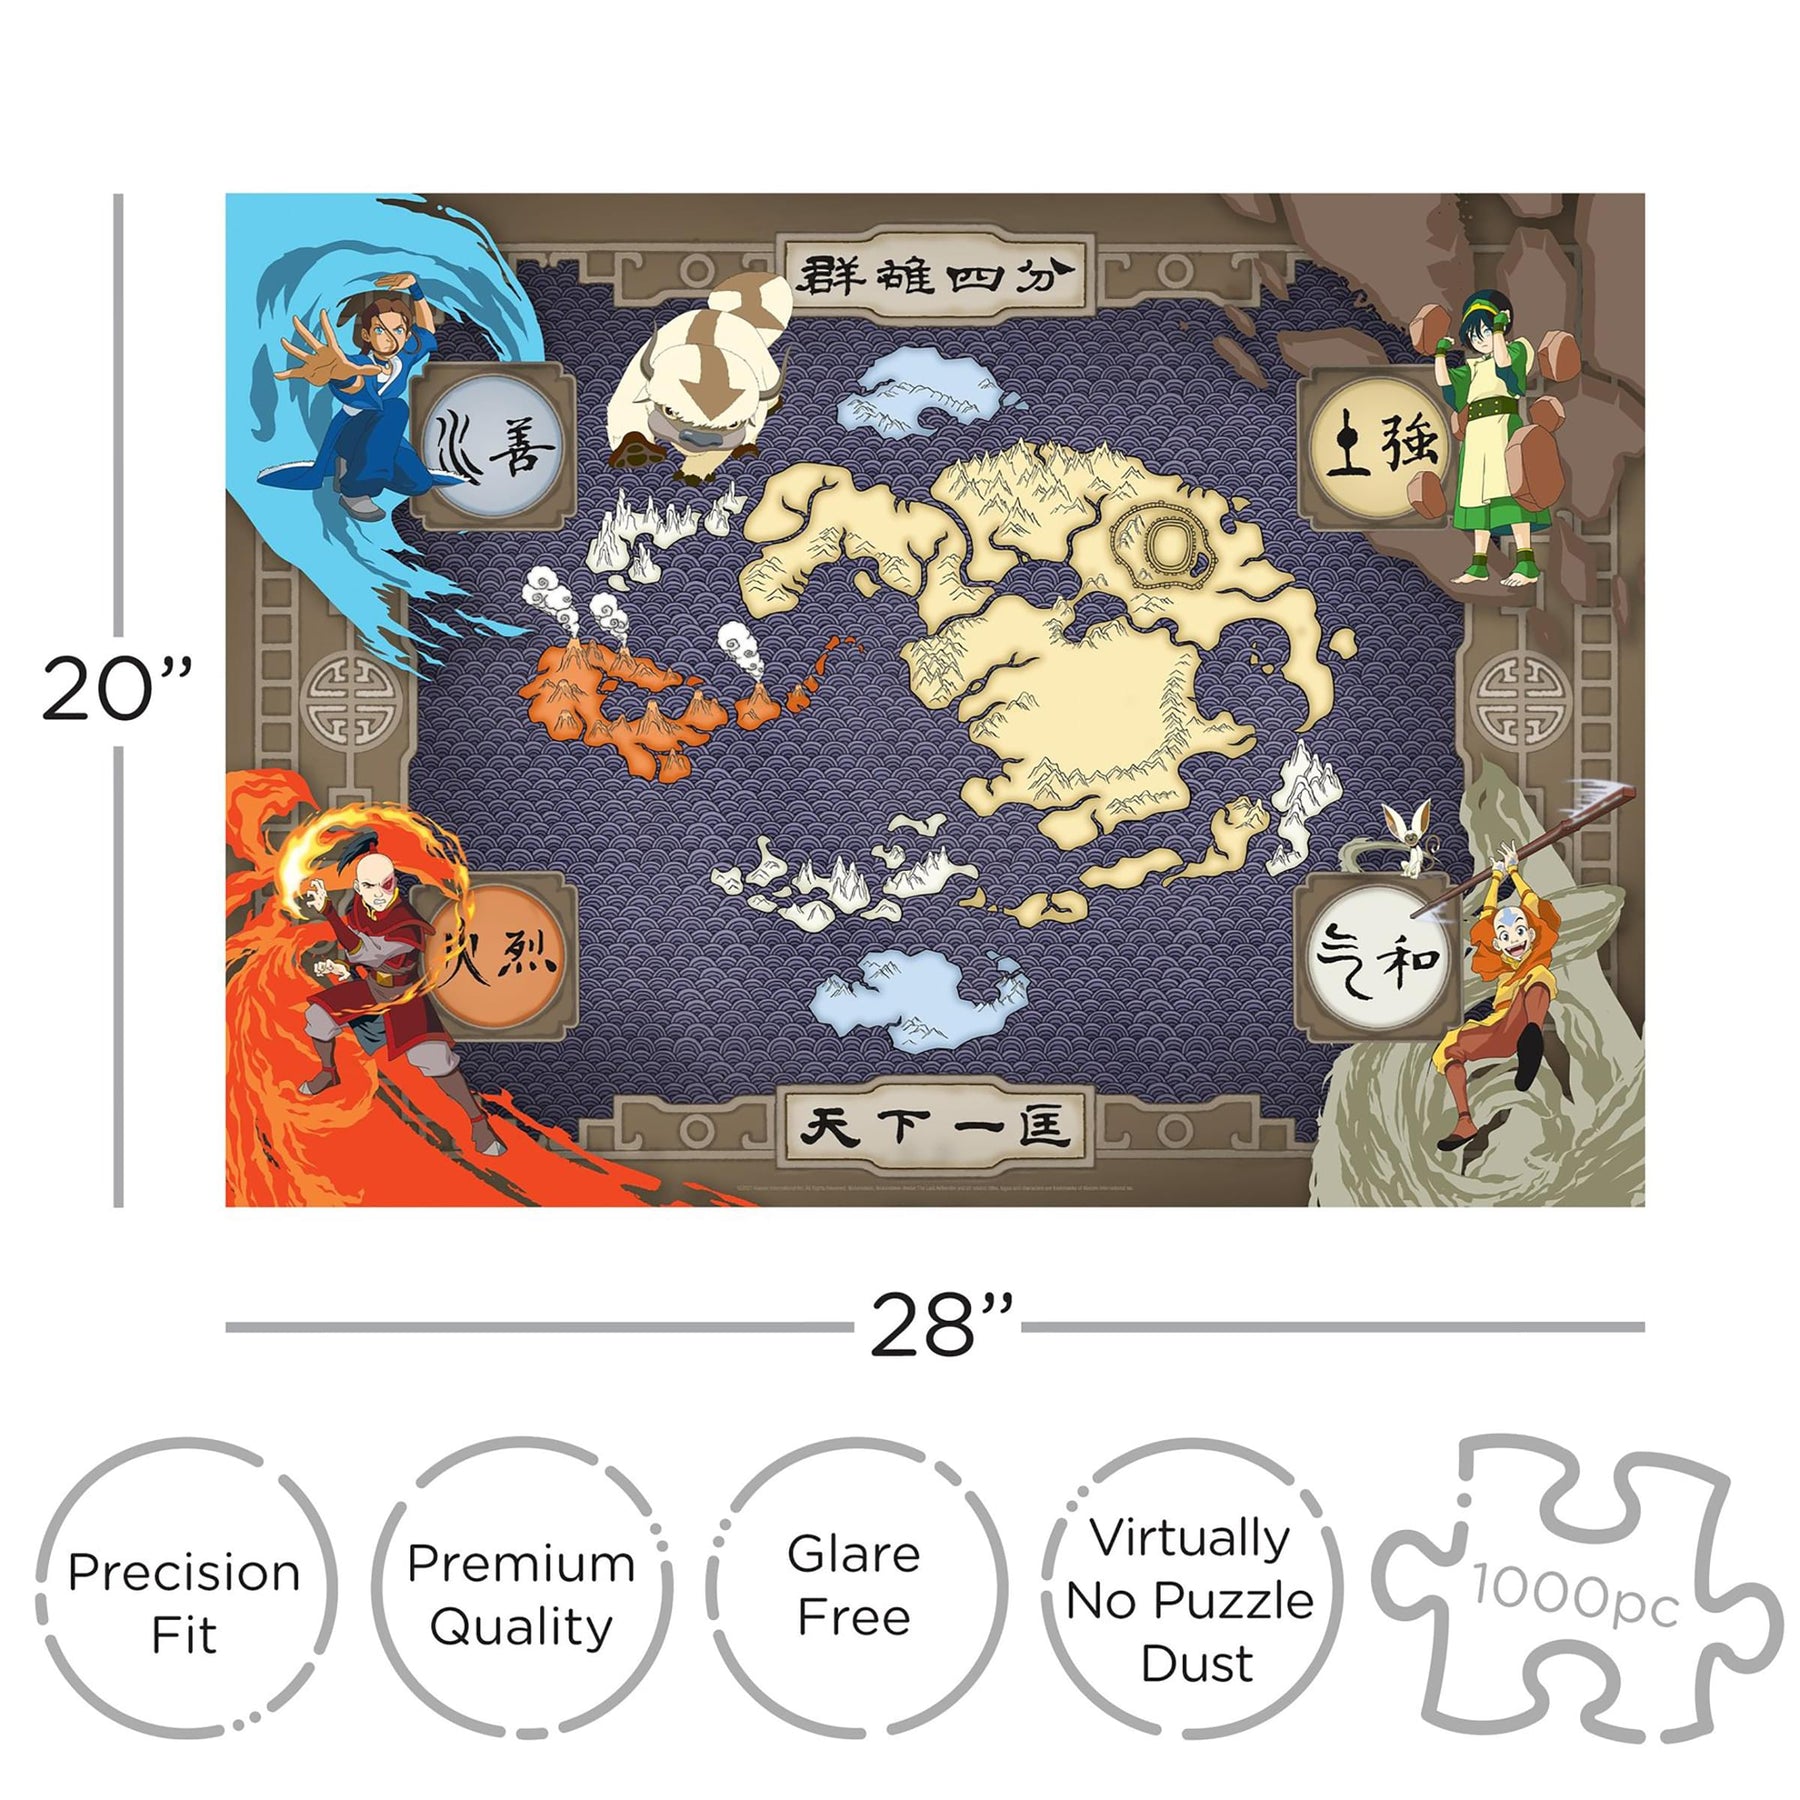 Avatar: The Last Airbender 1000 Piece Jigsaw Puzzle